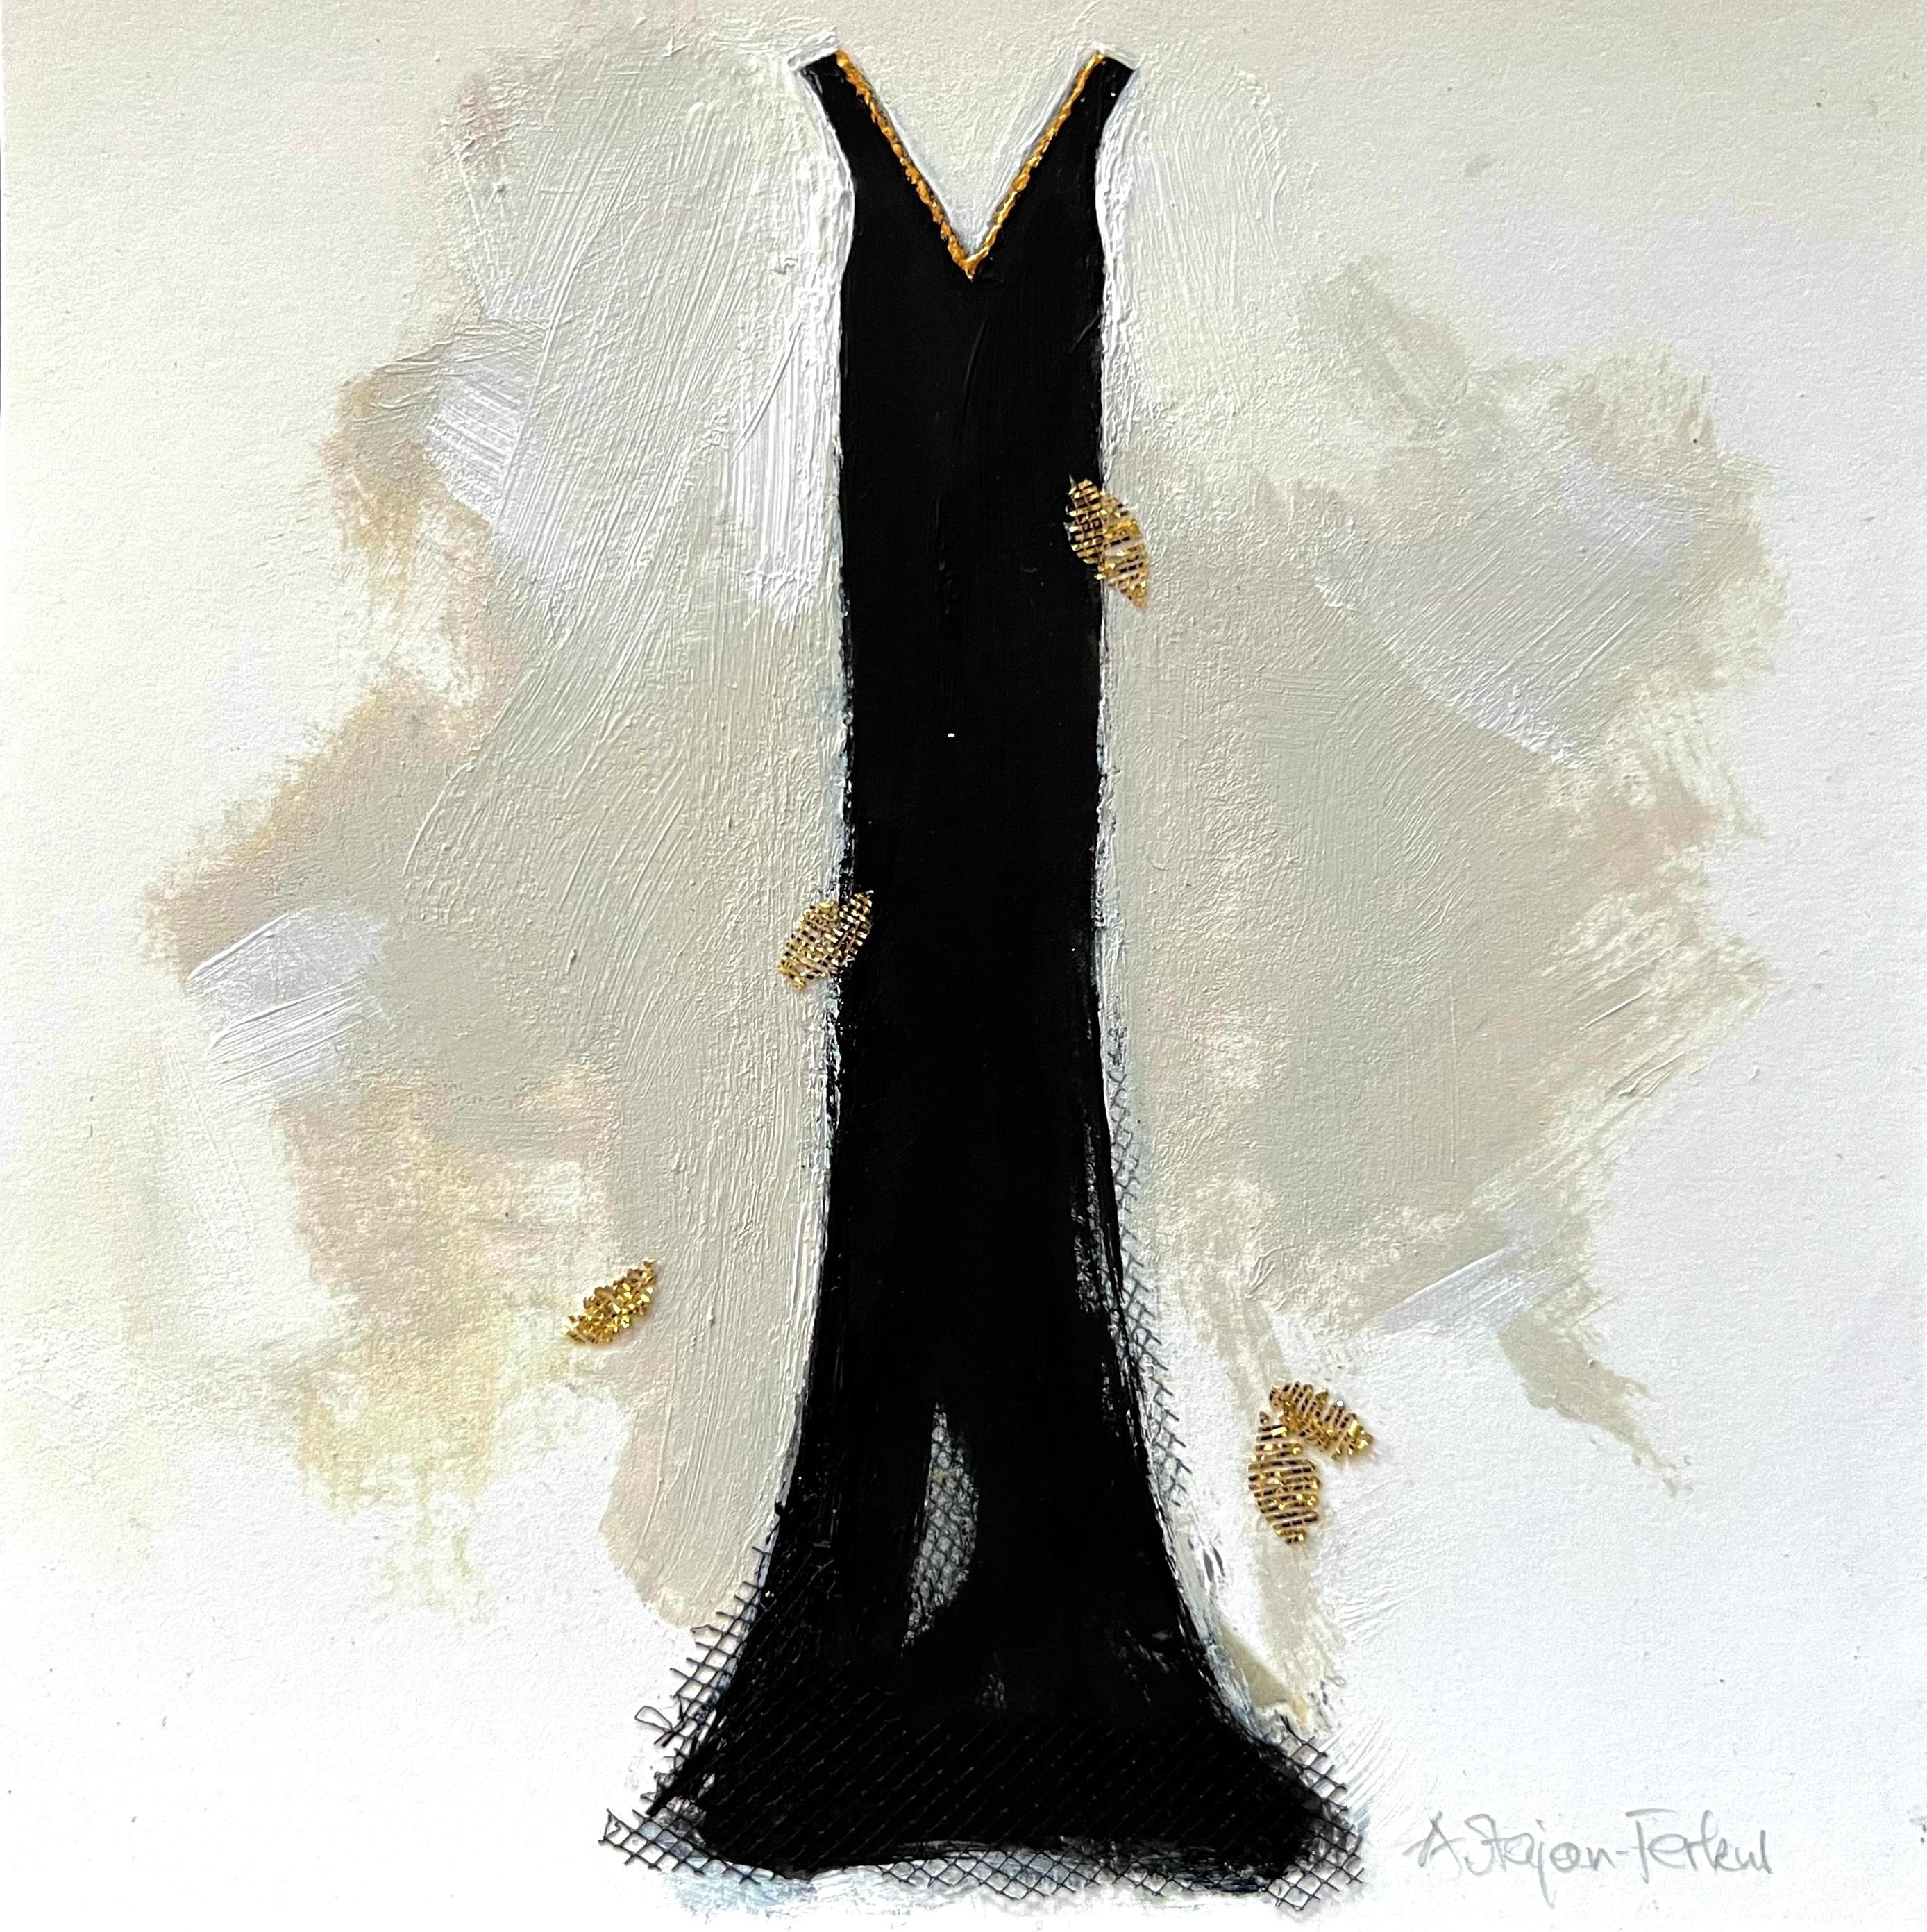 Homage to the little black dress. Chic and understated, this giclée print is enriched with added hand painted elements giving the print its own unique outcome. The special edition, one-of-a-kind, hand signed piece. is a blend of paint and textile